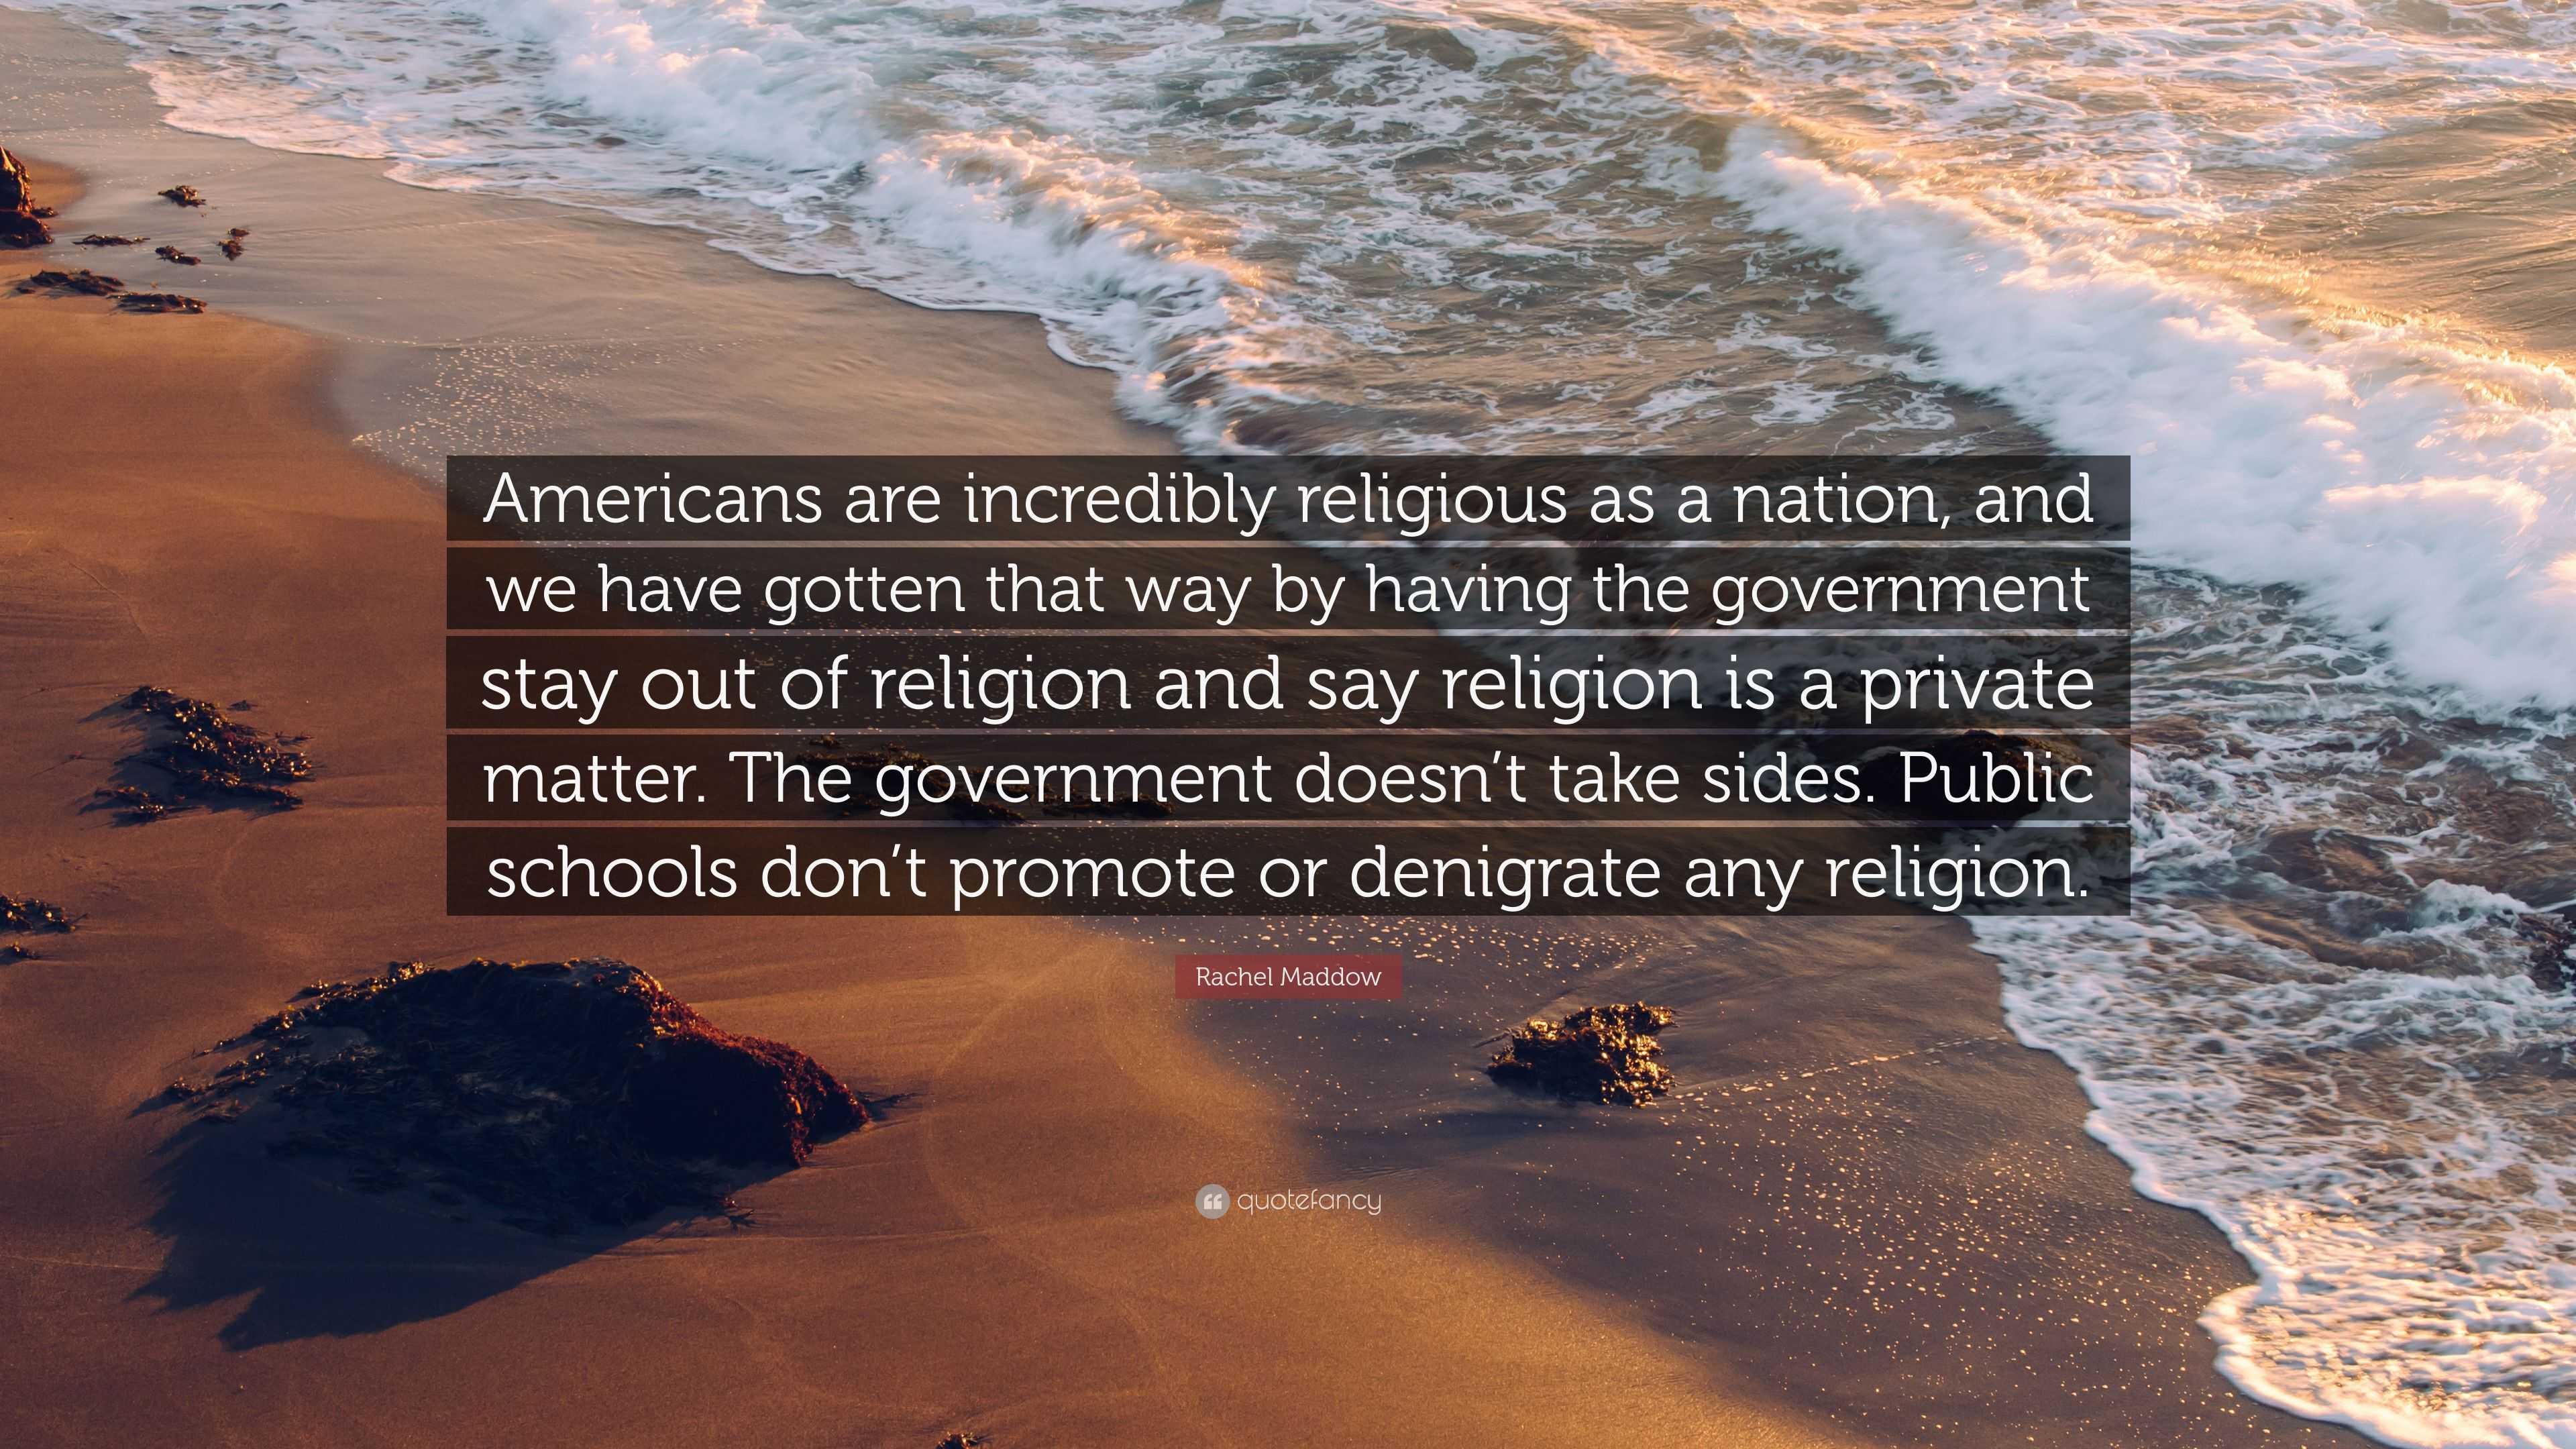 Rachel Maddow Quote “Americans are incredibly religious as a nation